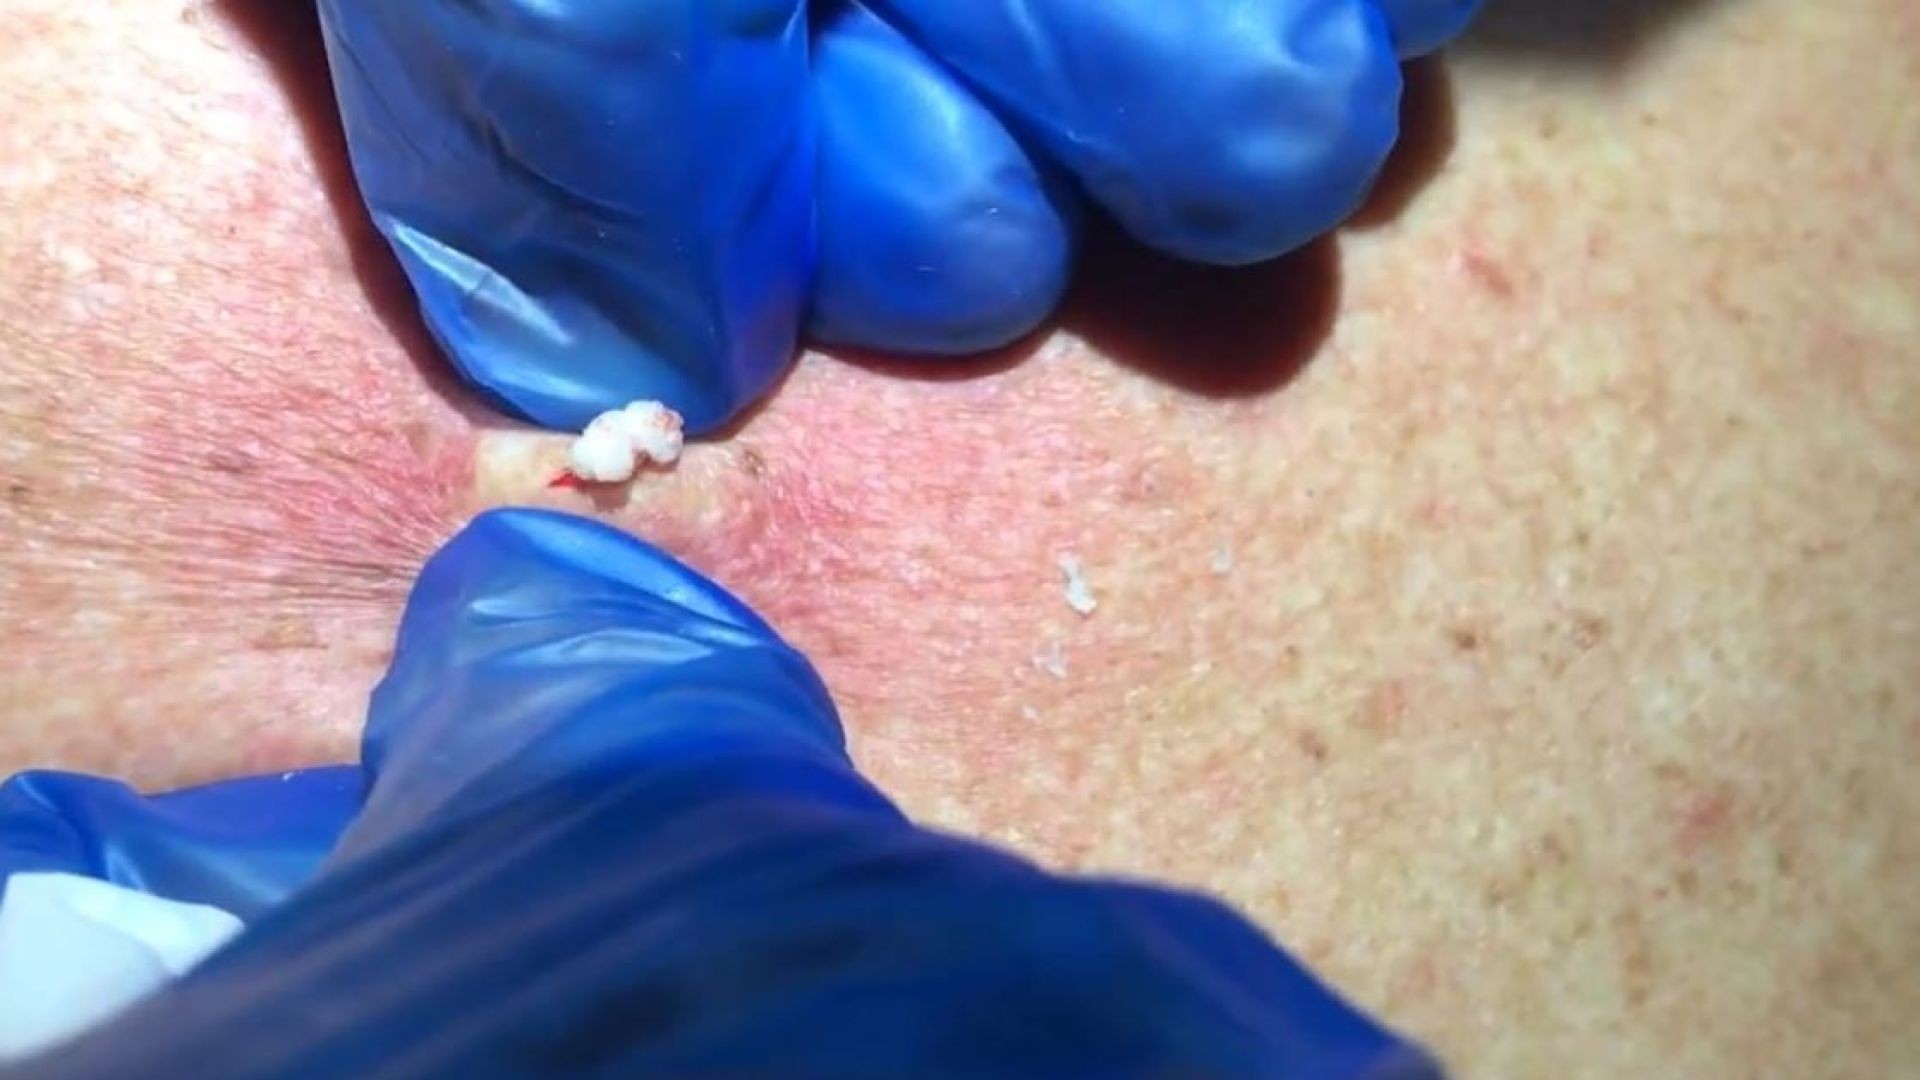 This is the One Cyst Popping Video to see